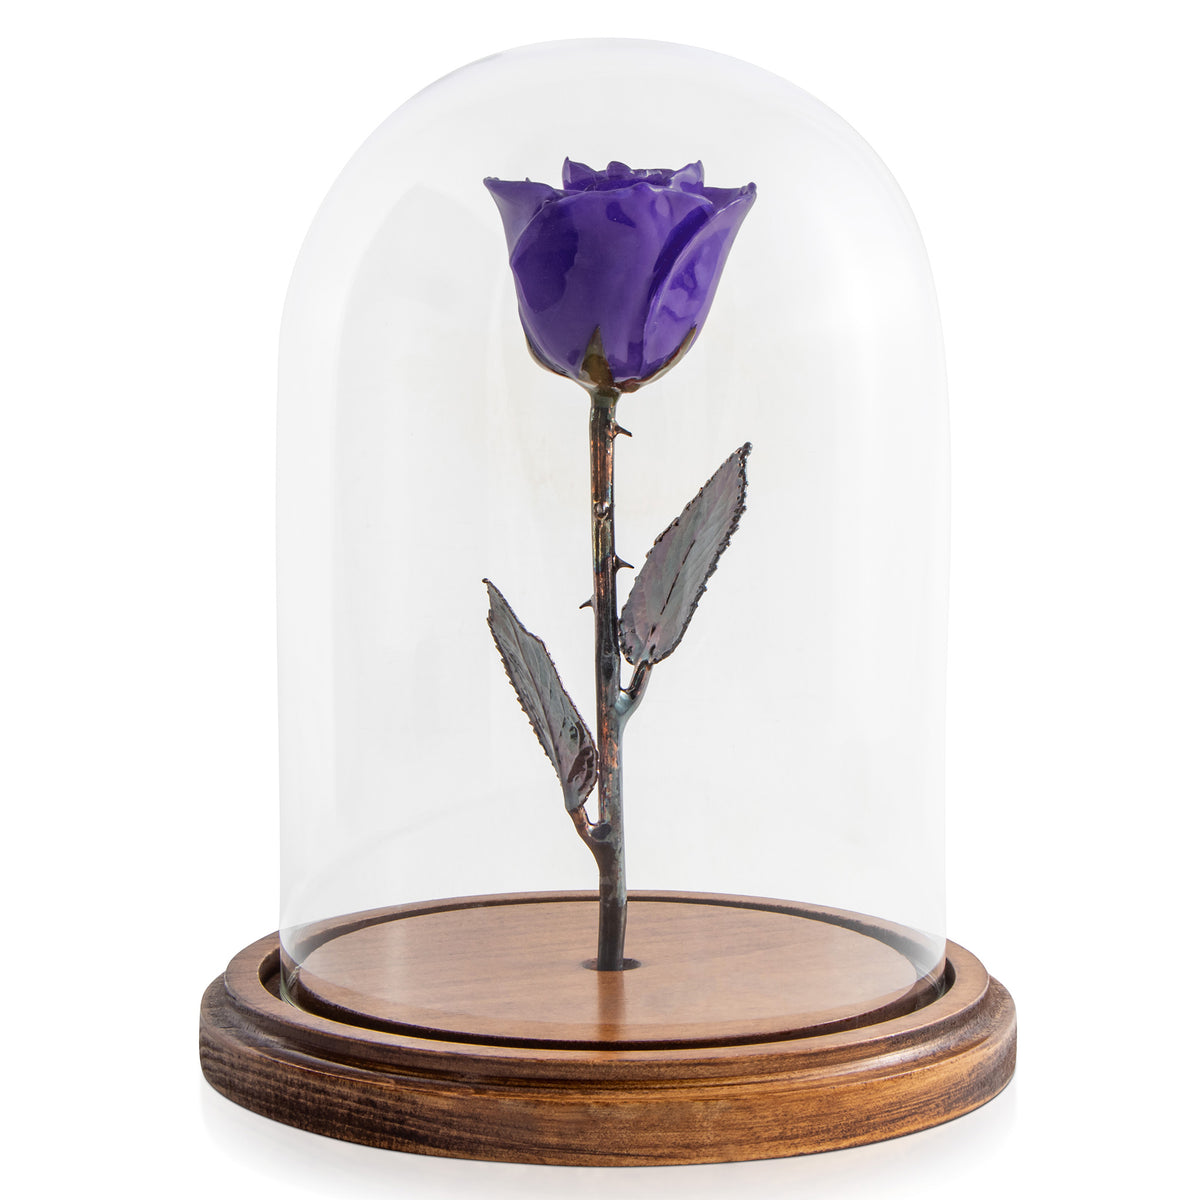 Purple Enchanted Rose (aka Beauty &amp; The Beast Rose) with Patina Copper Stem Mounted to A Hand Turned Solid Wood Base under a glass dome.